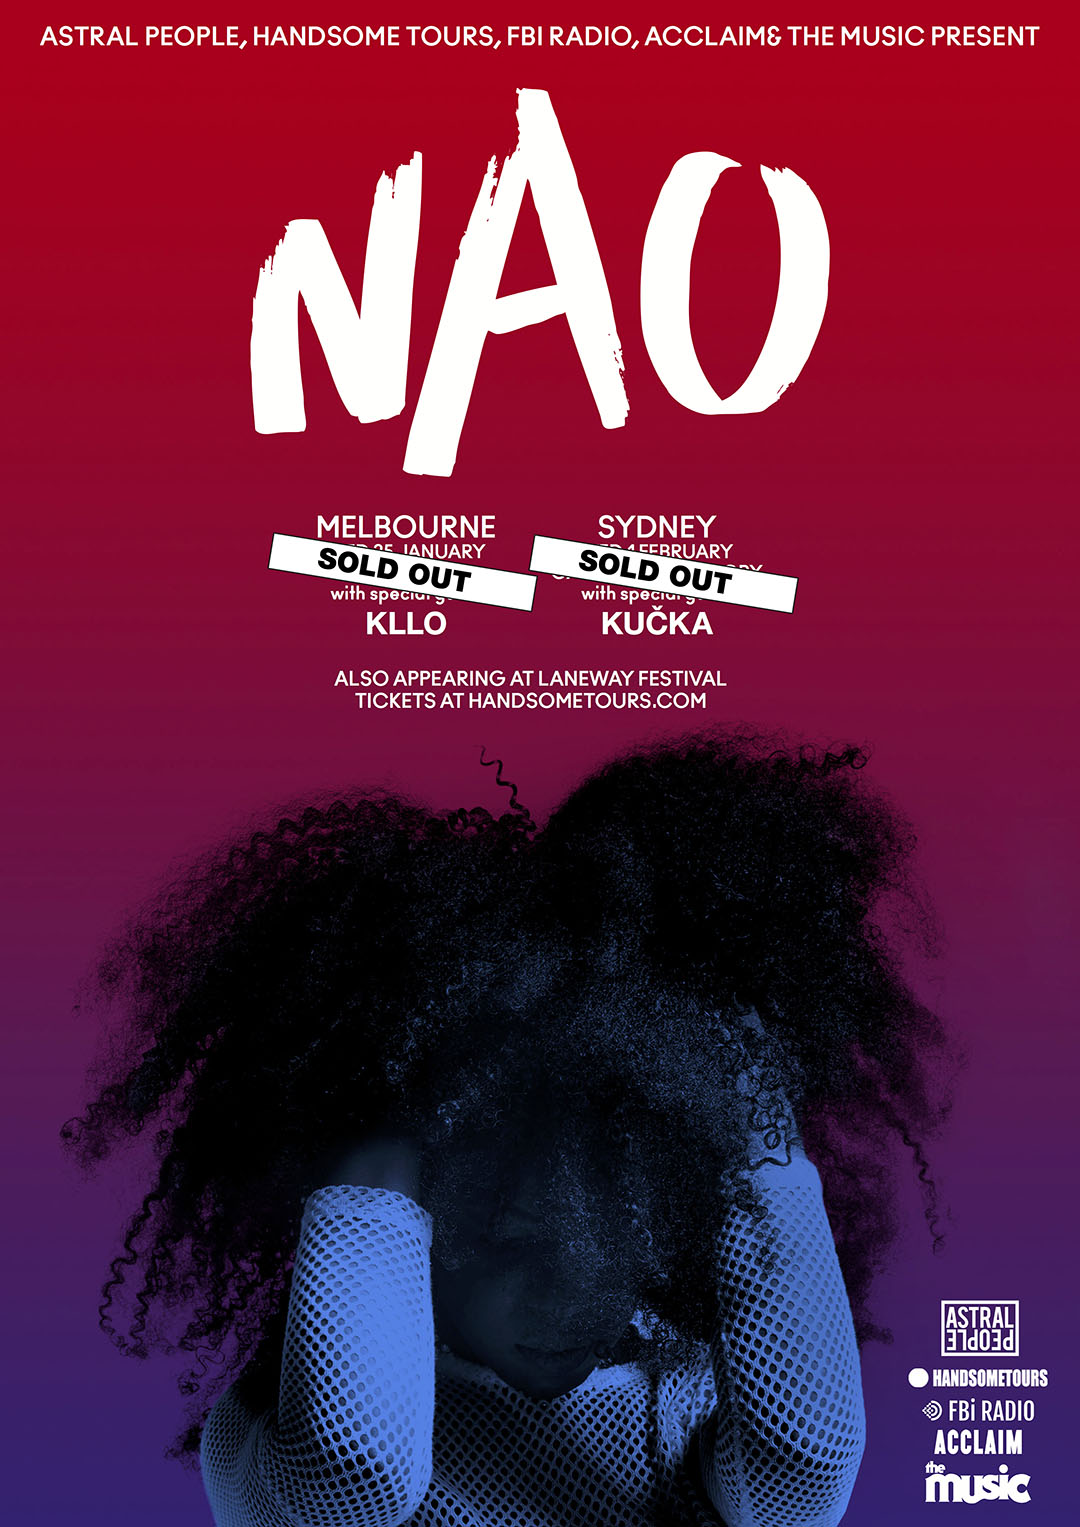 https://handsometours.com/wp-content/uploads/2016/09/NAO-SOLD-OUT-01.jpg